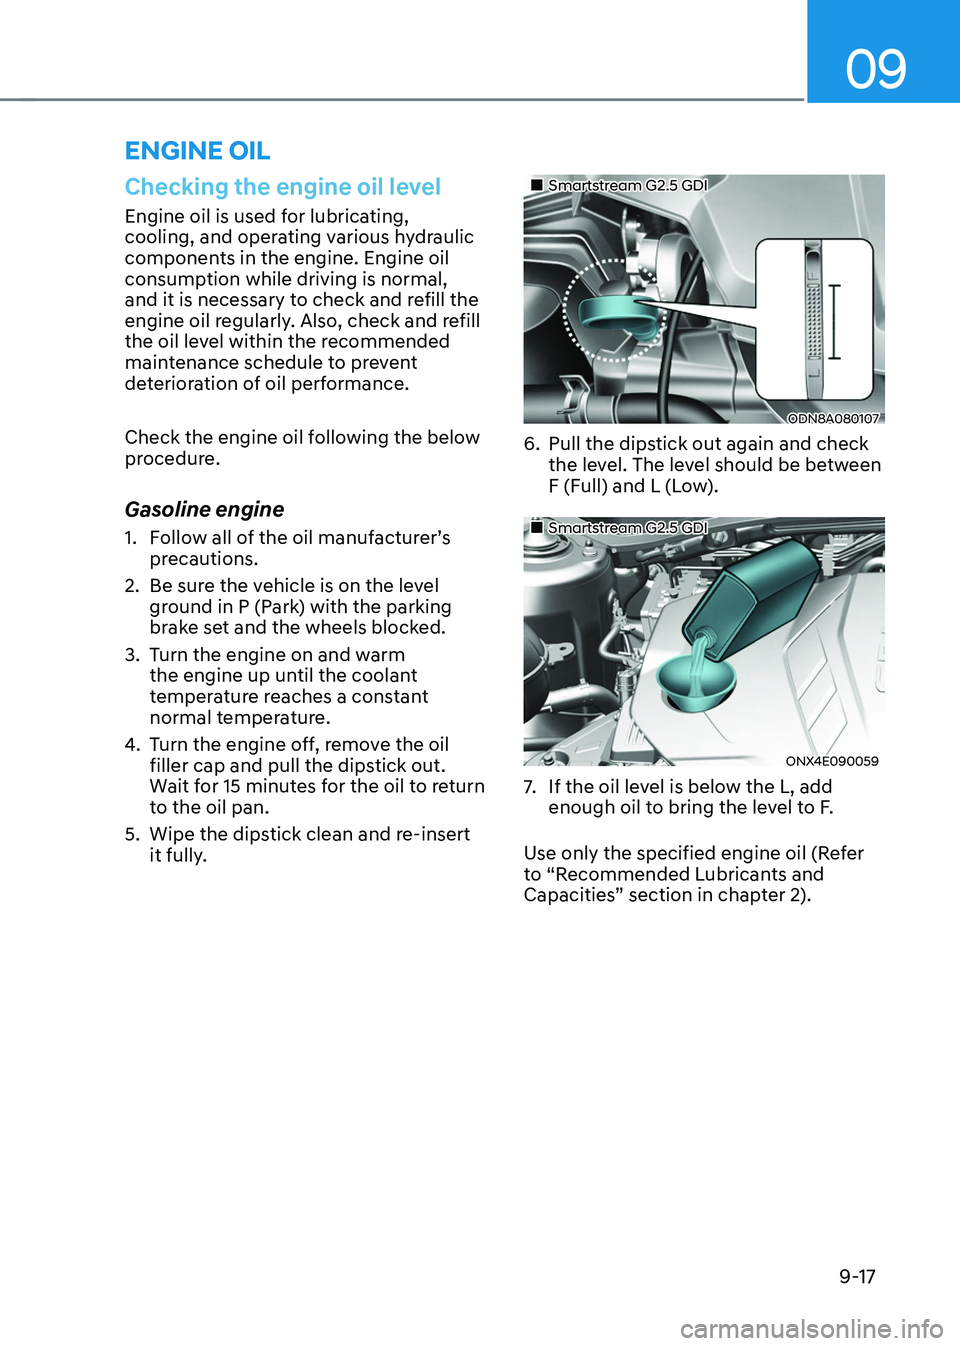 HYUNDAI TUCSON 2022  Owners Manual 09
9-17
ENGINE OIL
Checking the engine oil level
Engine oil is used for lubricating, 
cooling, and operating various hydraulic 
components in the engine. Engine oil 
consumption while driving is norma